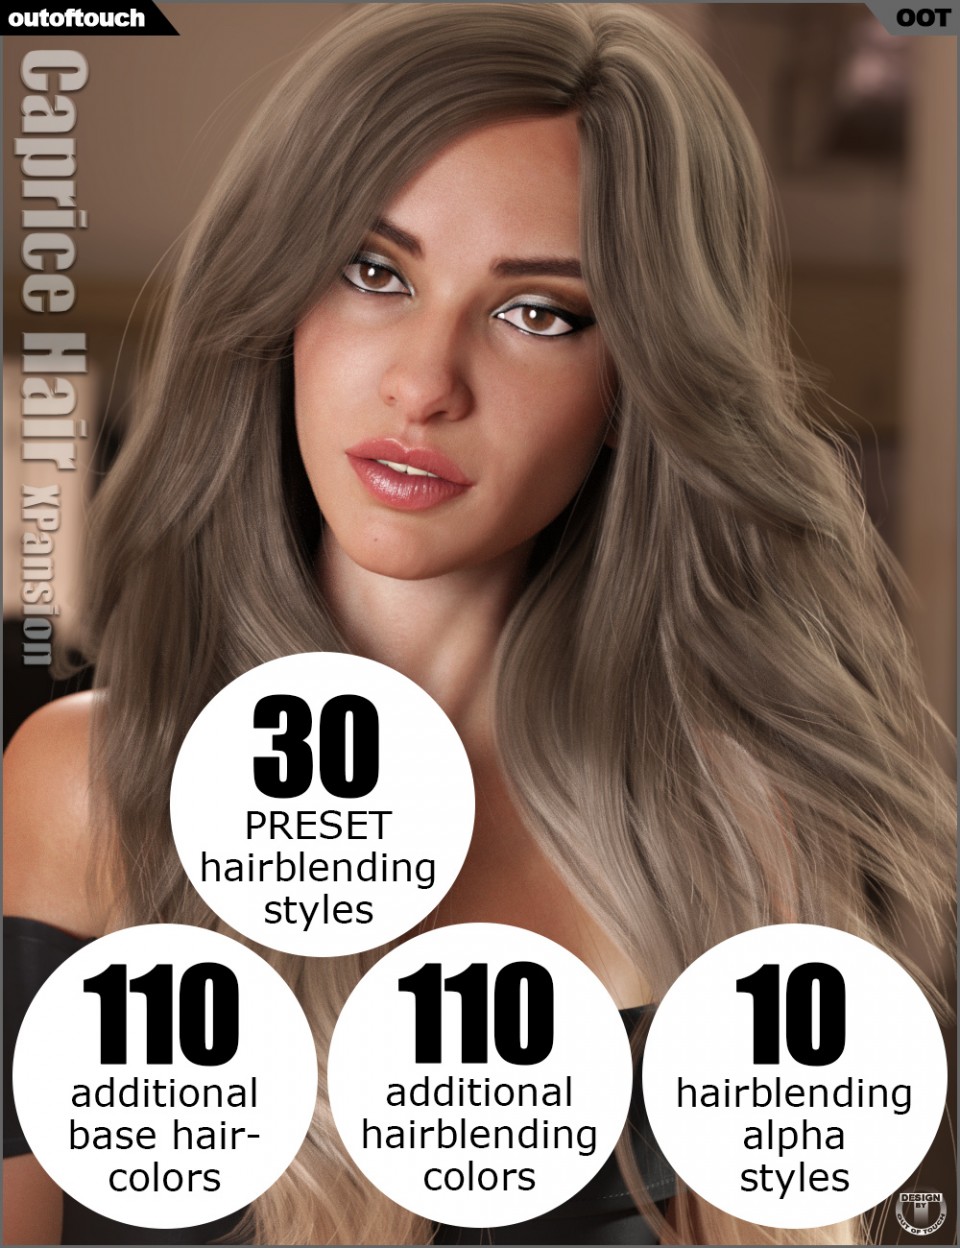 oot-hairblending-2.0-texture-xpansion-for-caprice-hair